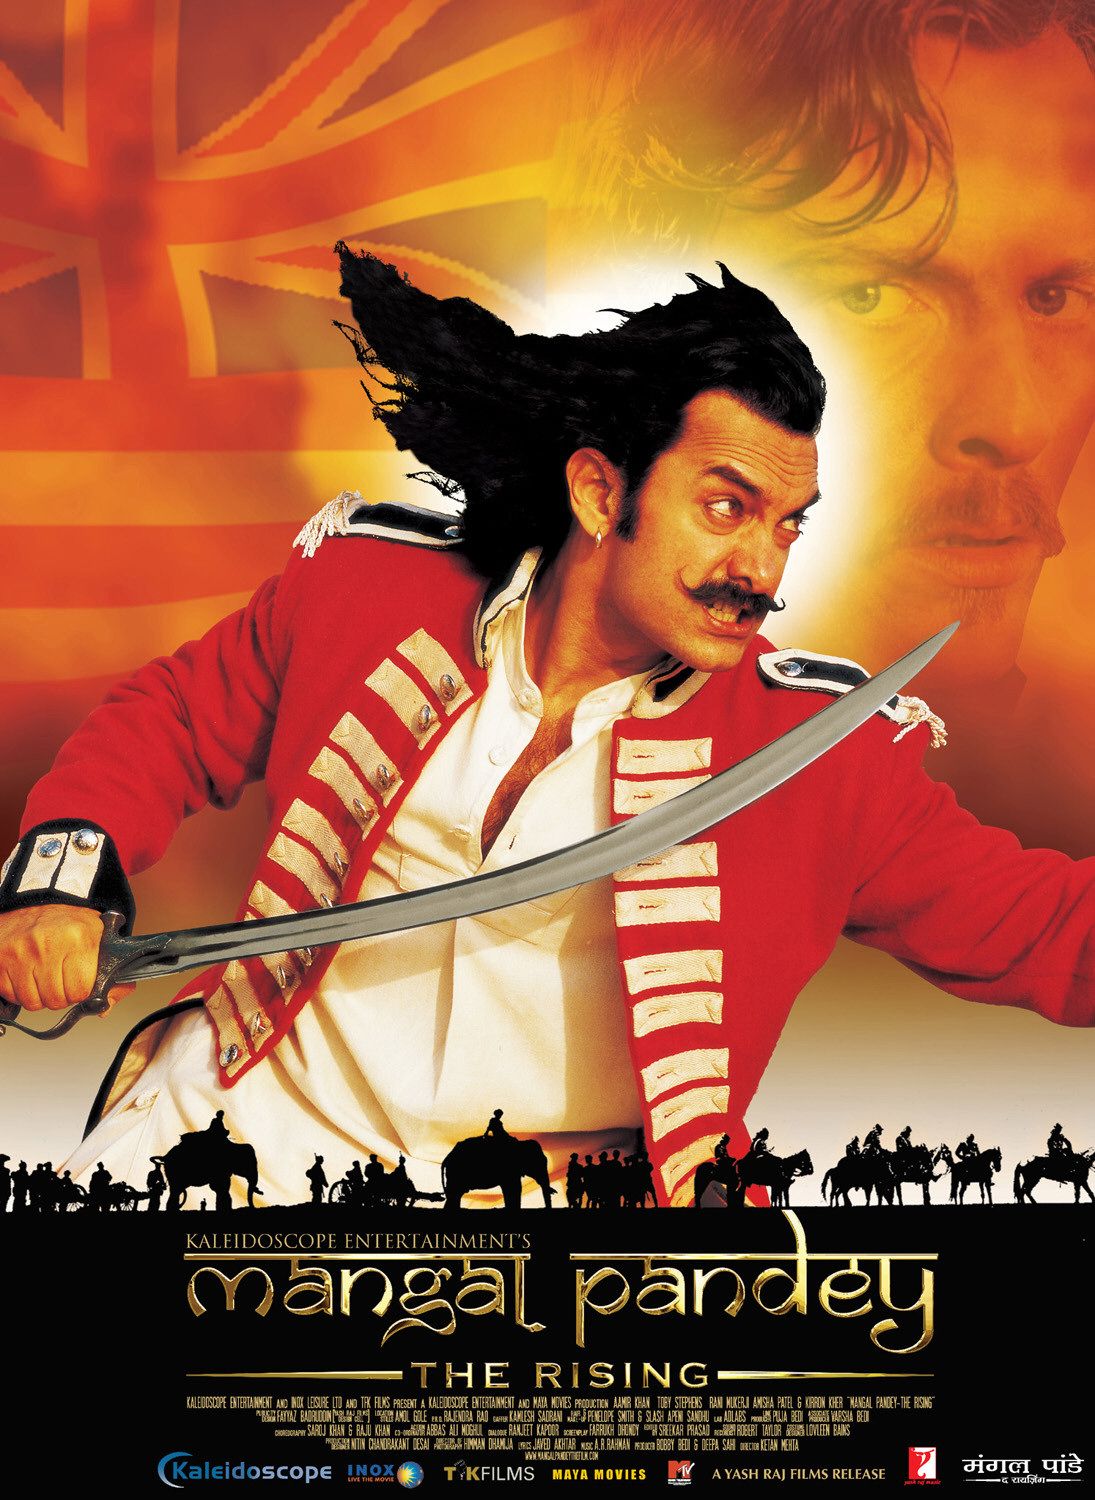 http://www.impawards.com/intl/india/2005/posters/mangal_pandey_the_rising_ver4_xlg.jpg